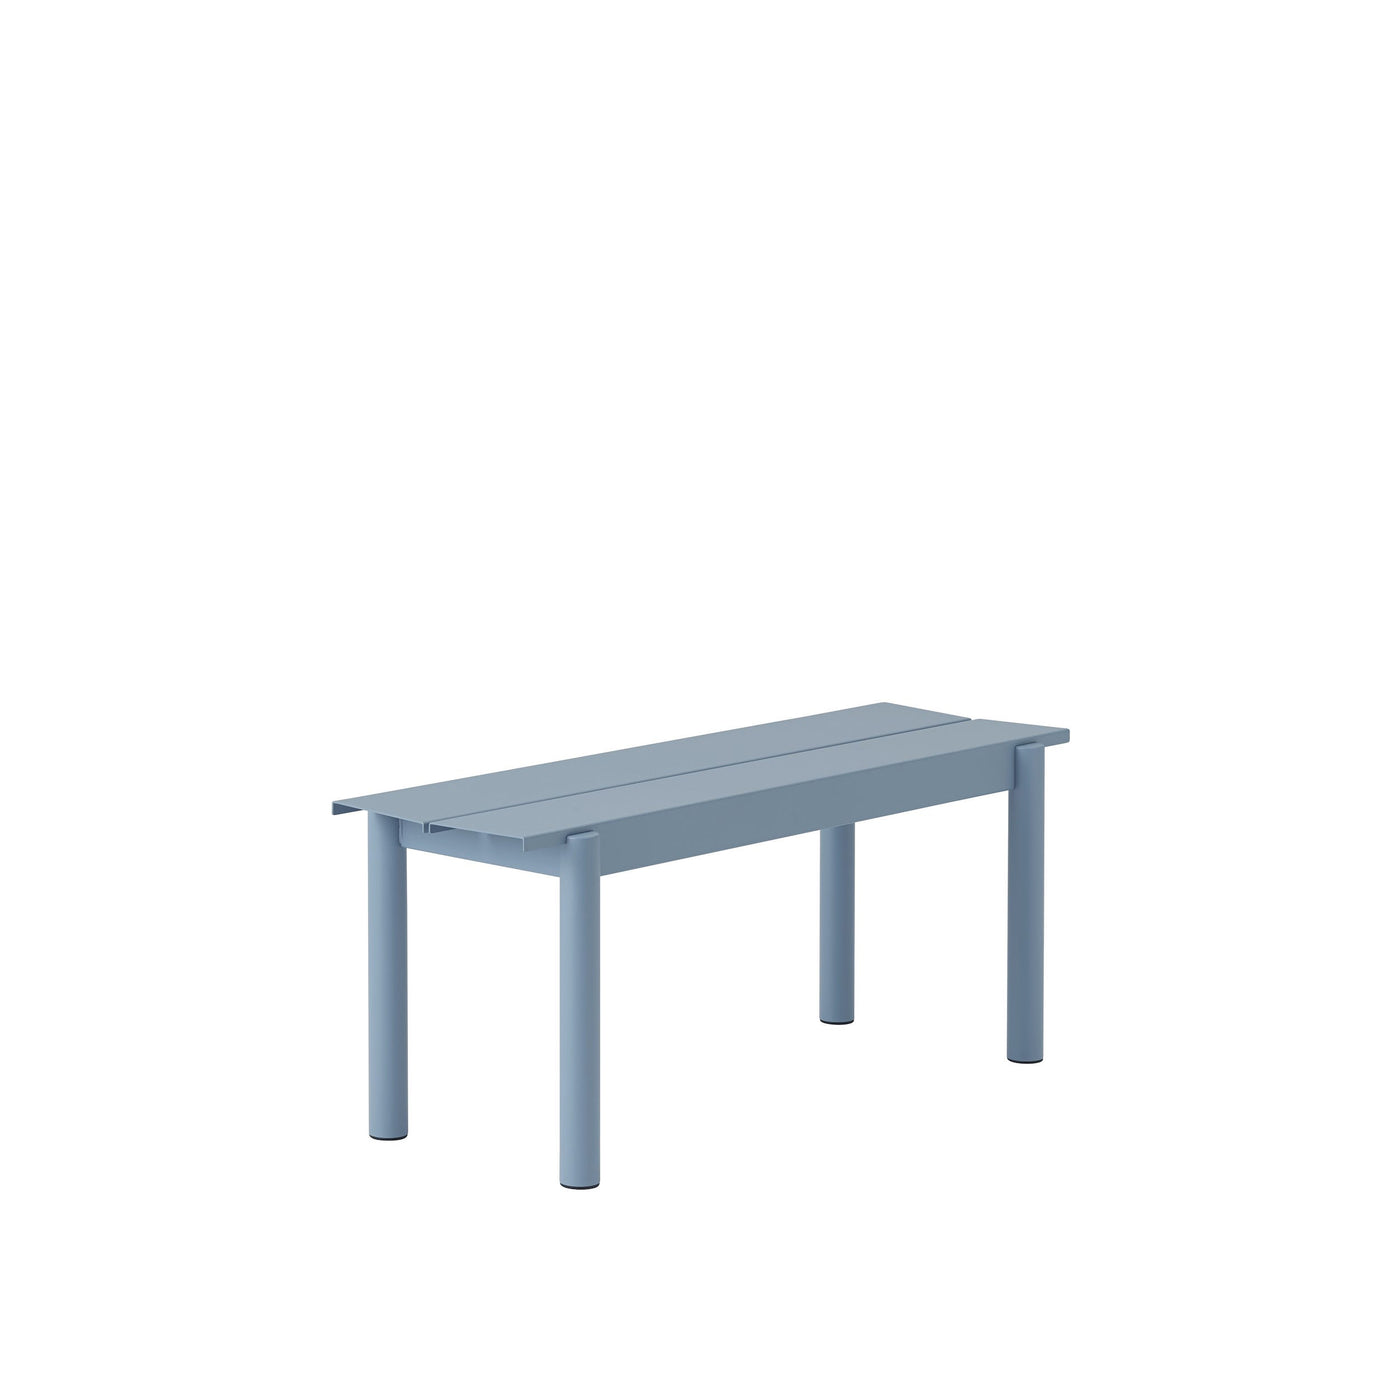 Muuto Linear Steel Bench, 34x110. Outdoor furniture at someday designs. #colour_pale-blue